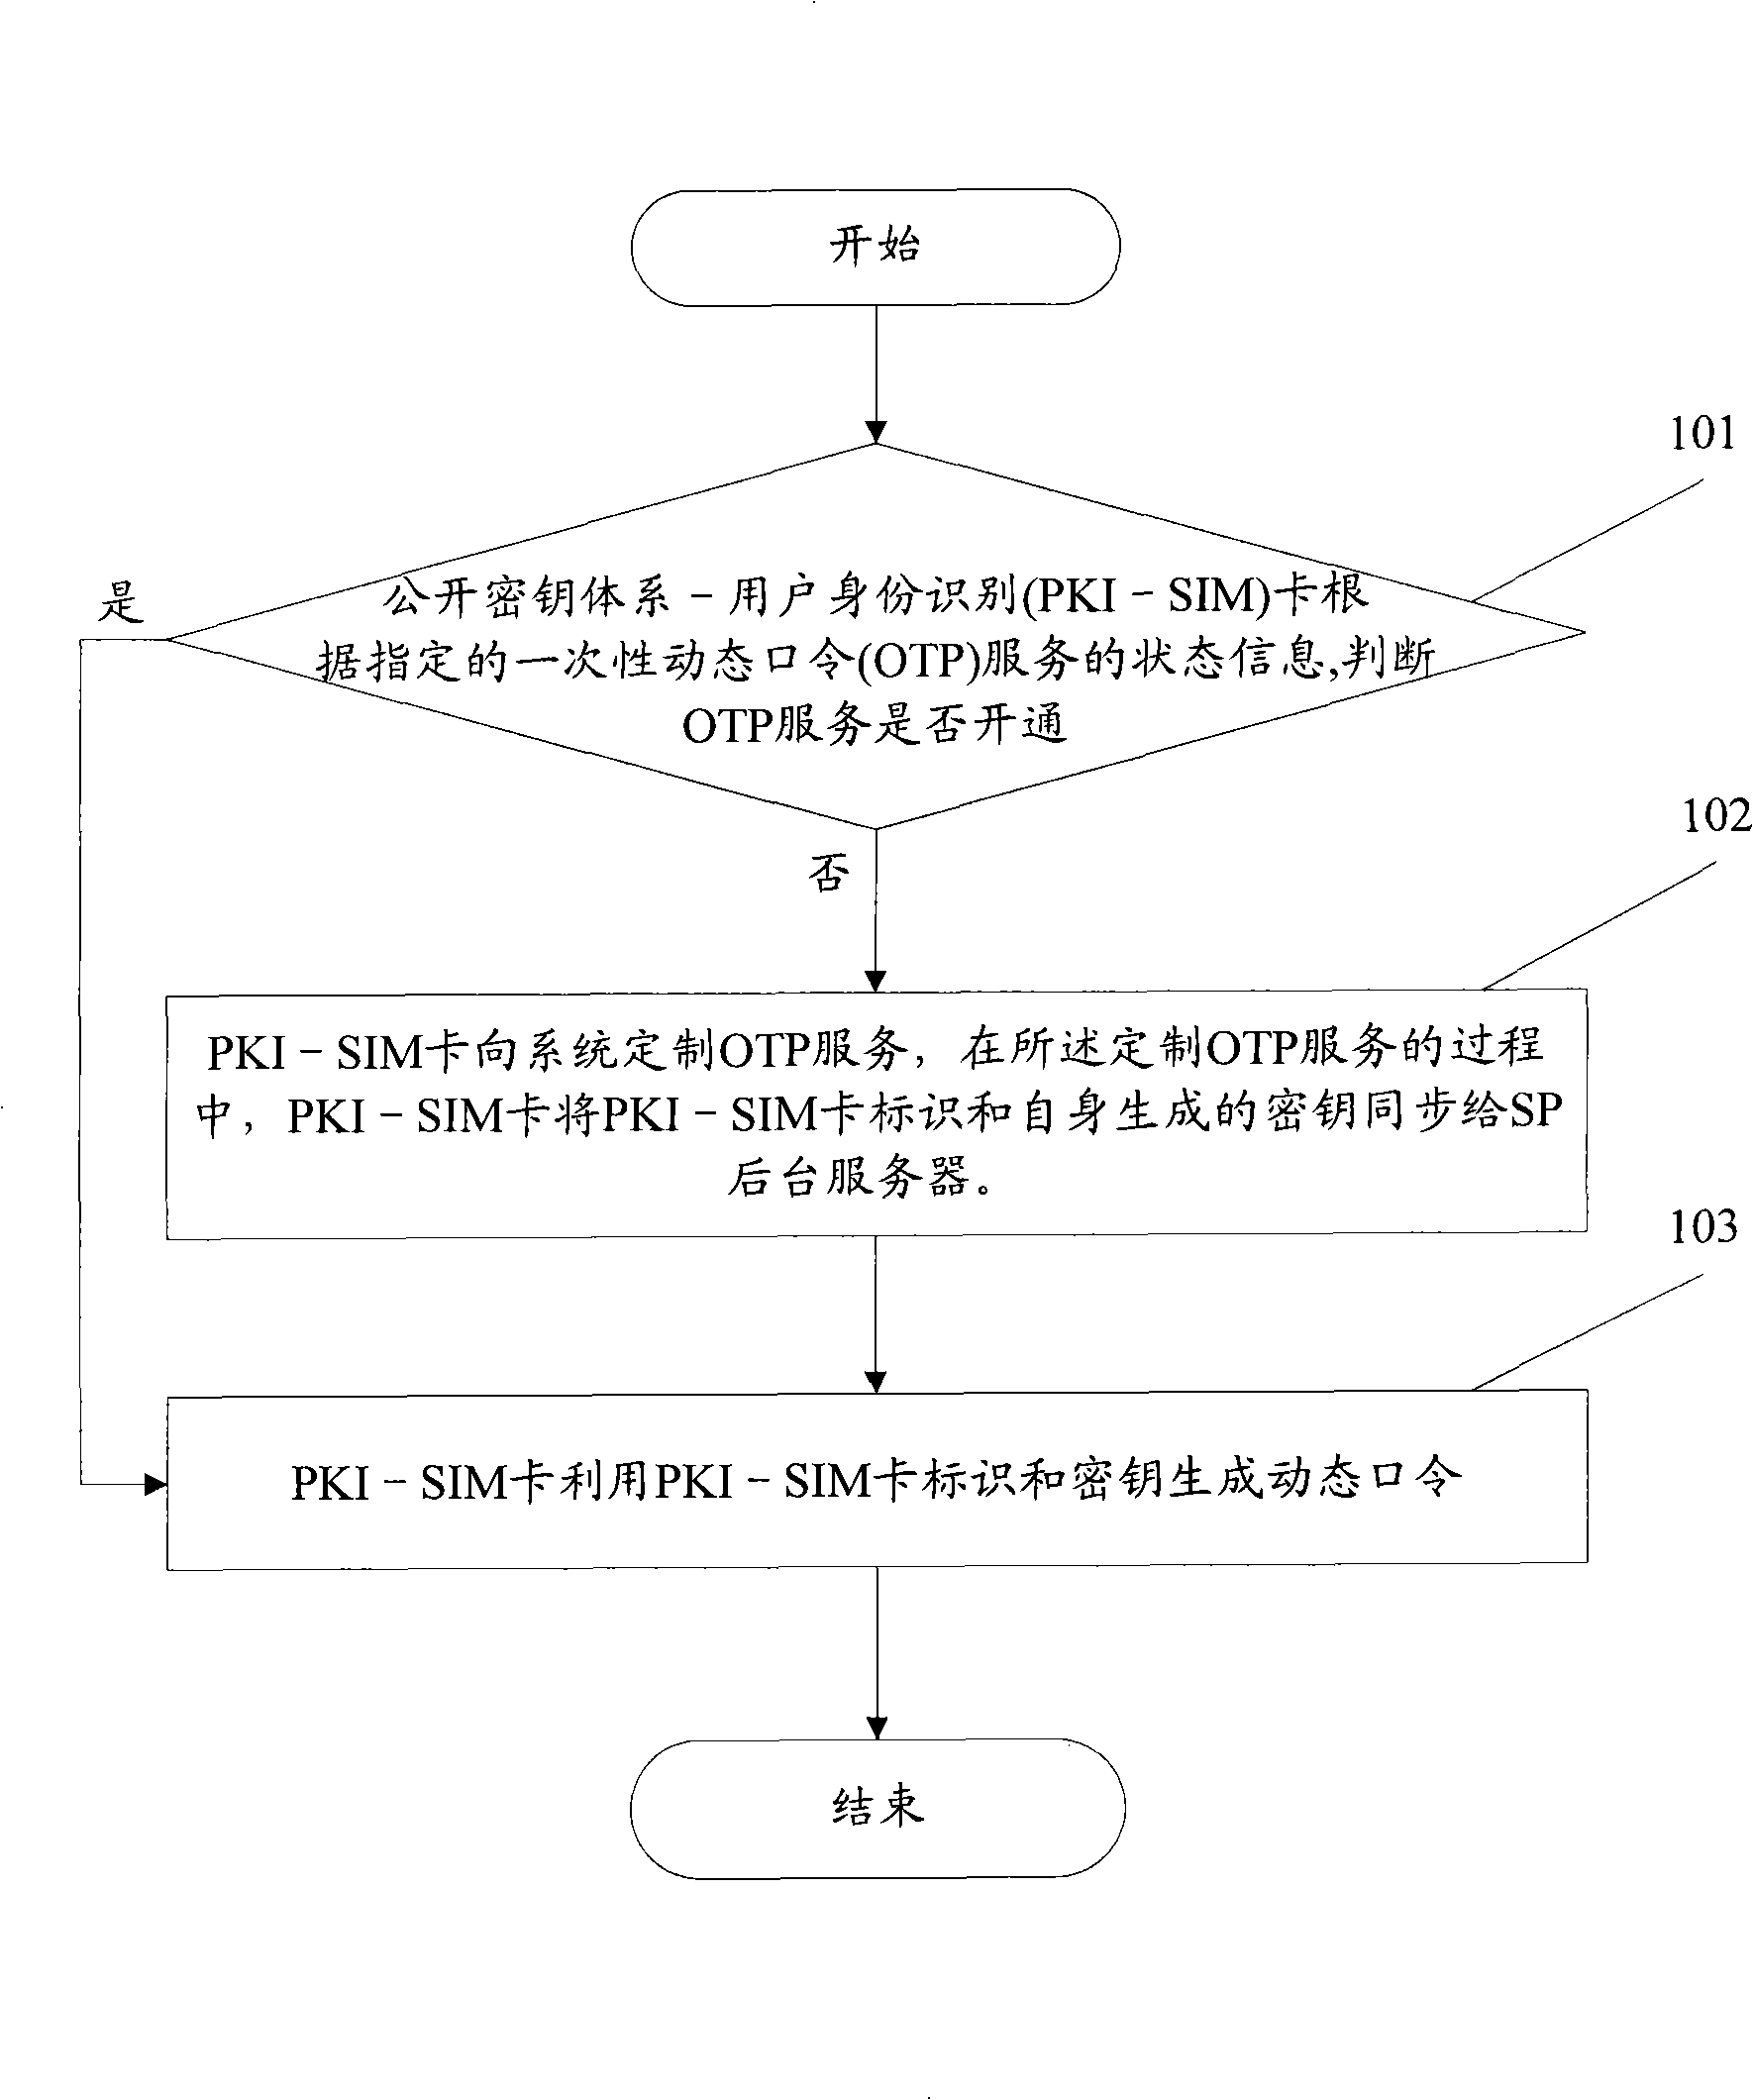 Method for acquiring dynamic password based on public key architecture-user personal identification card